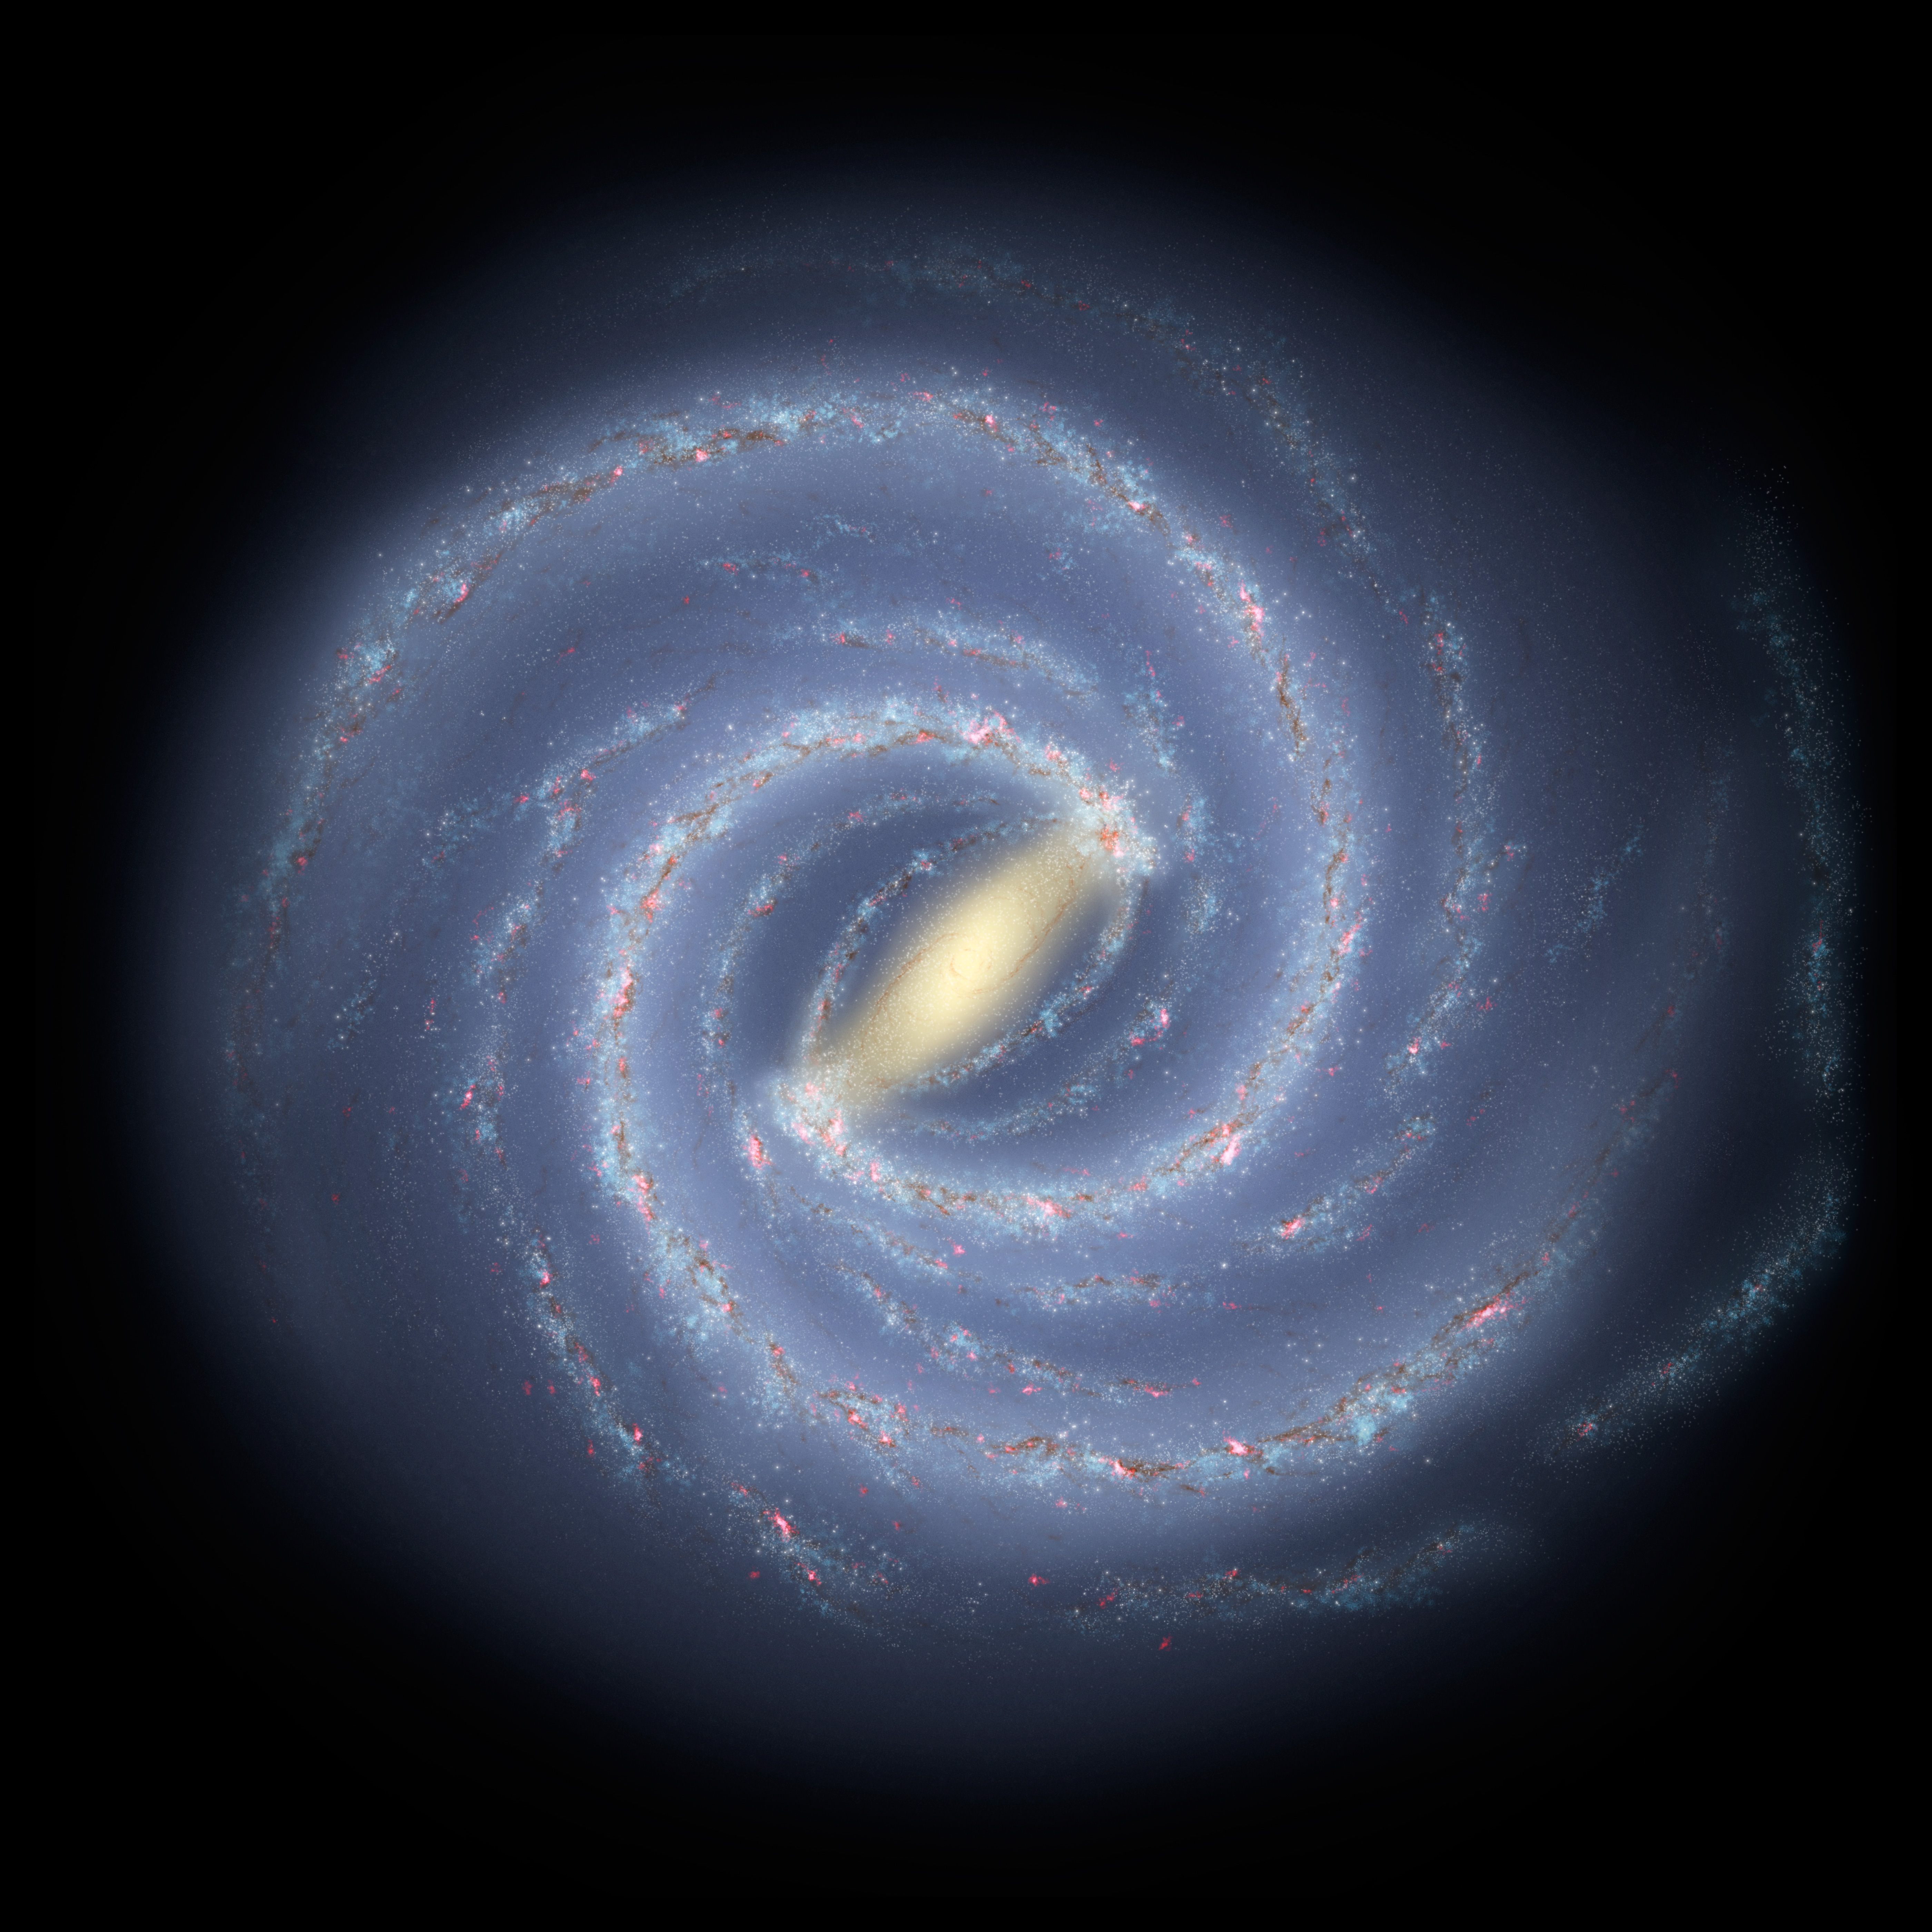 Artist's impression of the Milky Way.